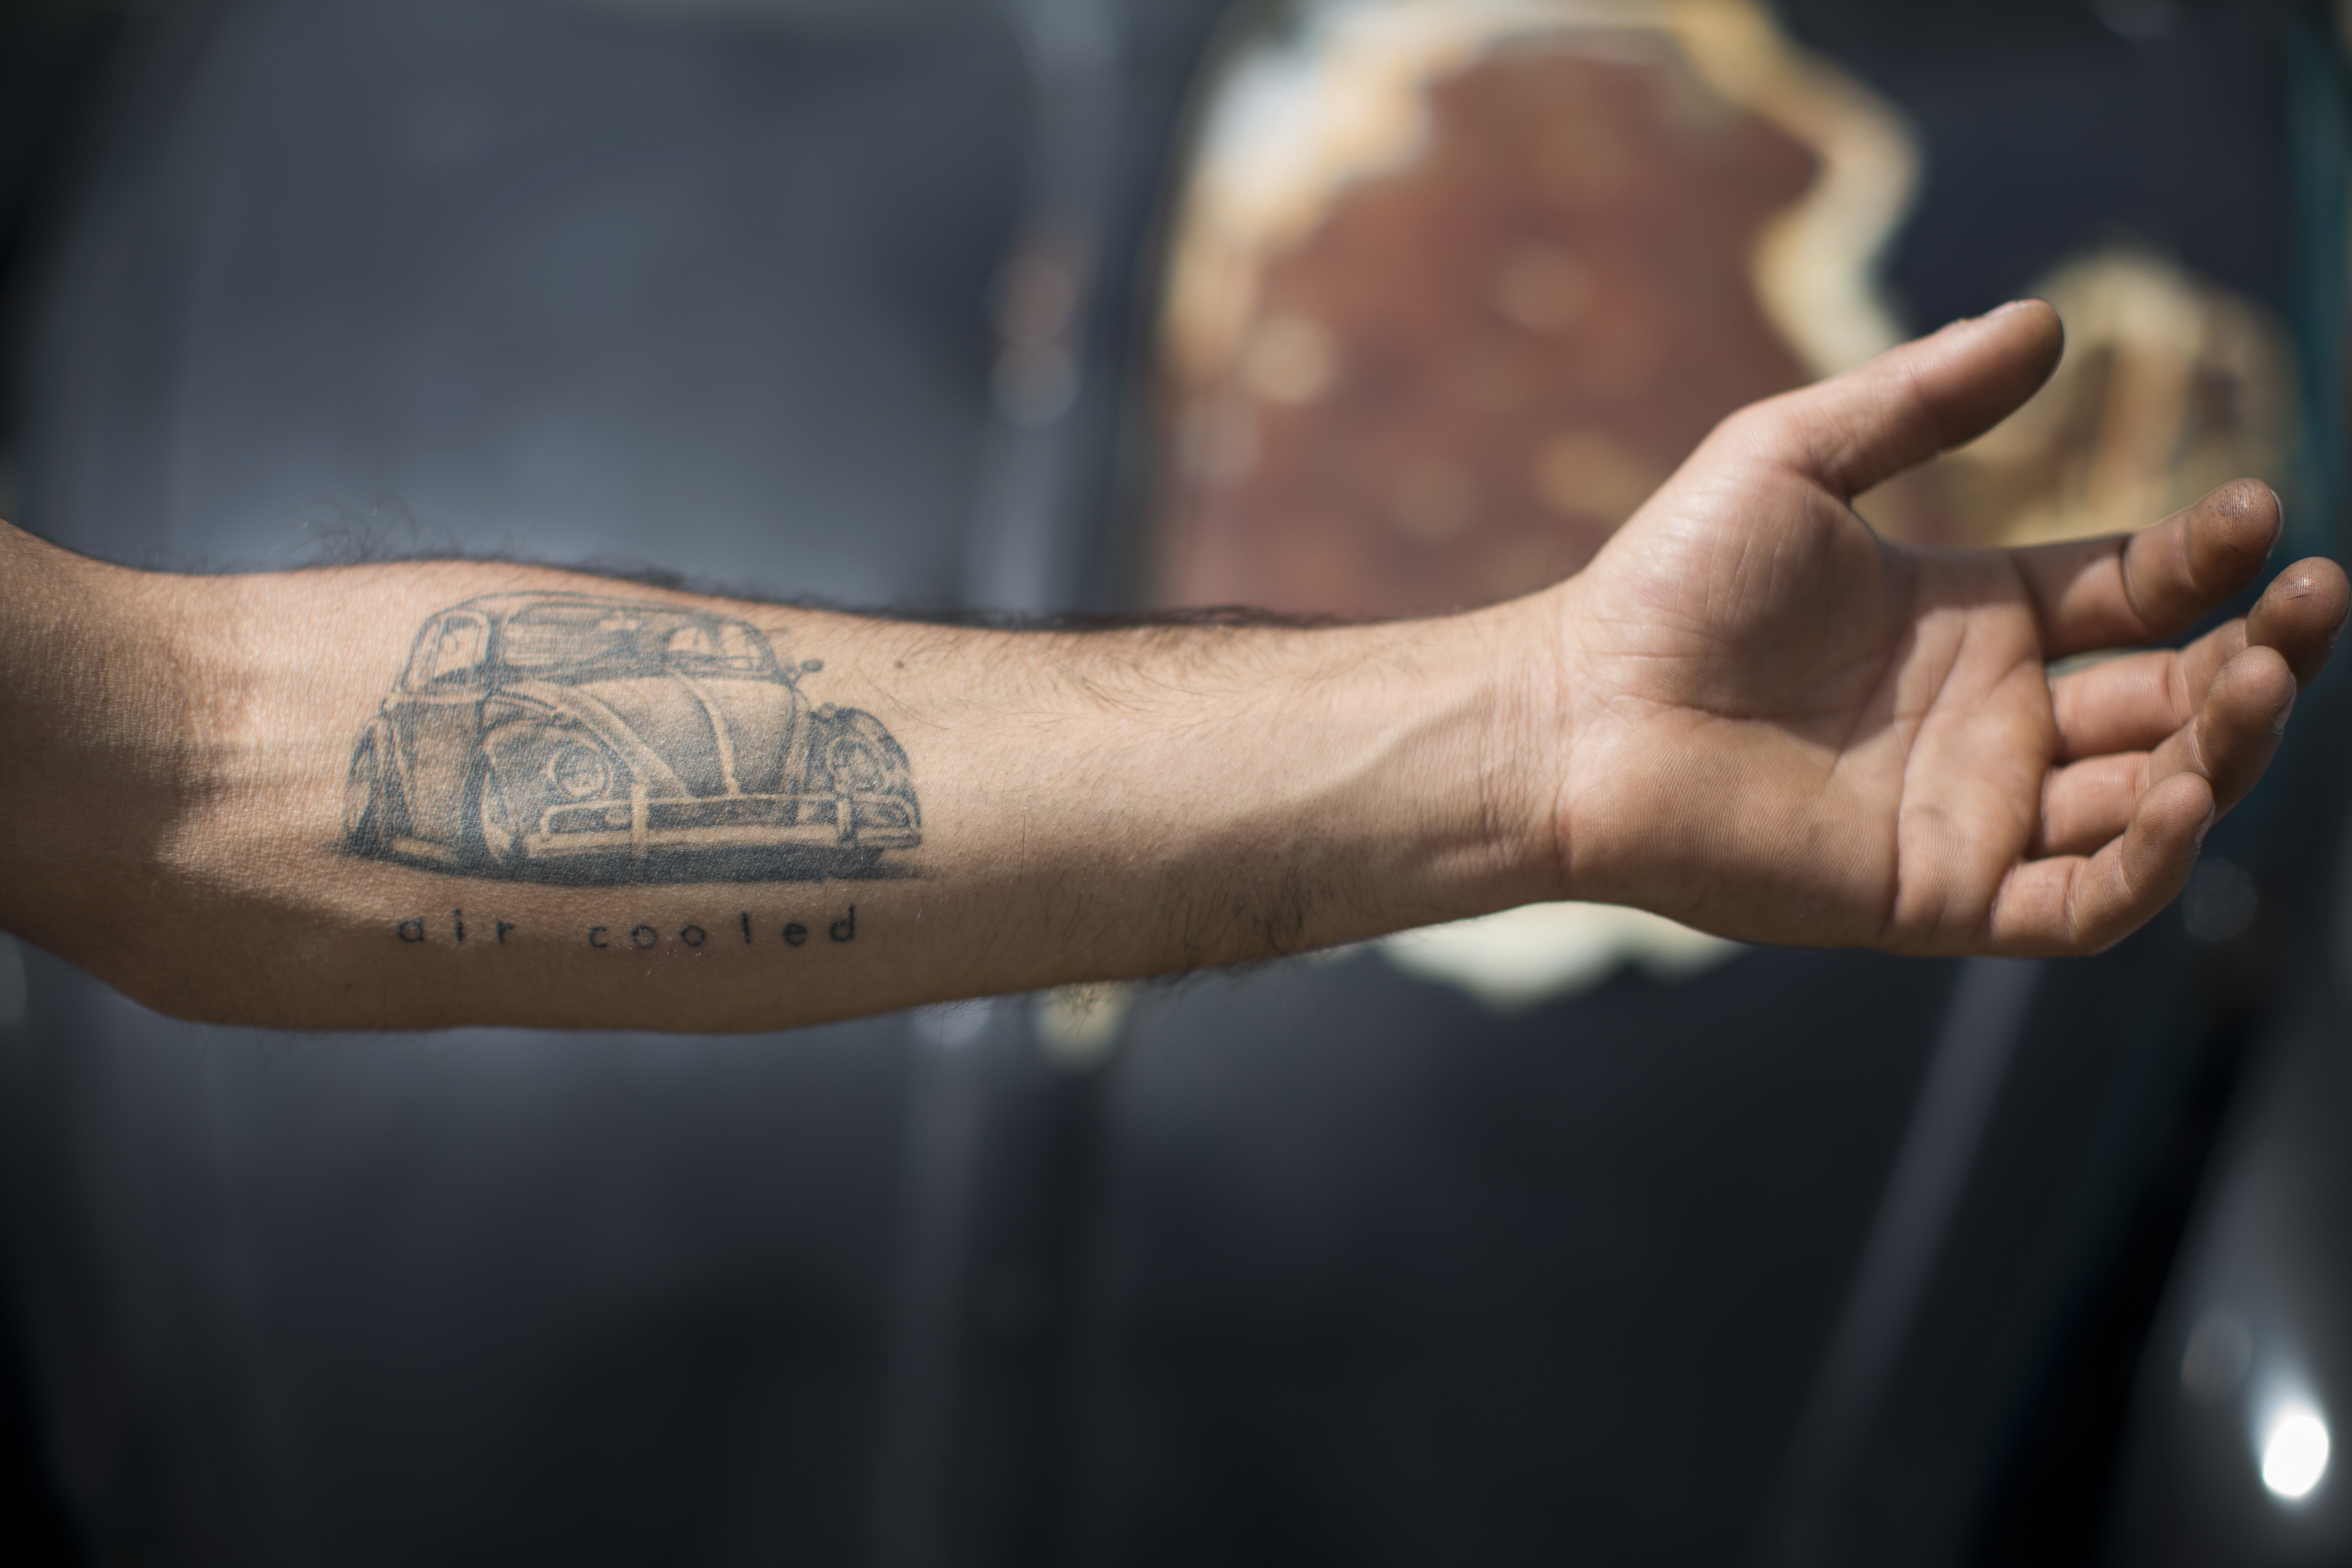 A Volkswagen Beetle owner shows his tattoo during the annual gathering of the 